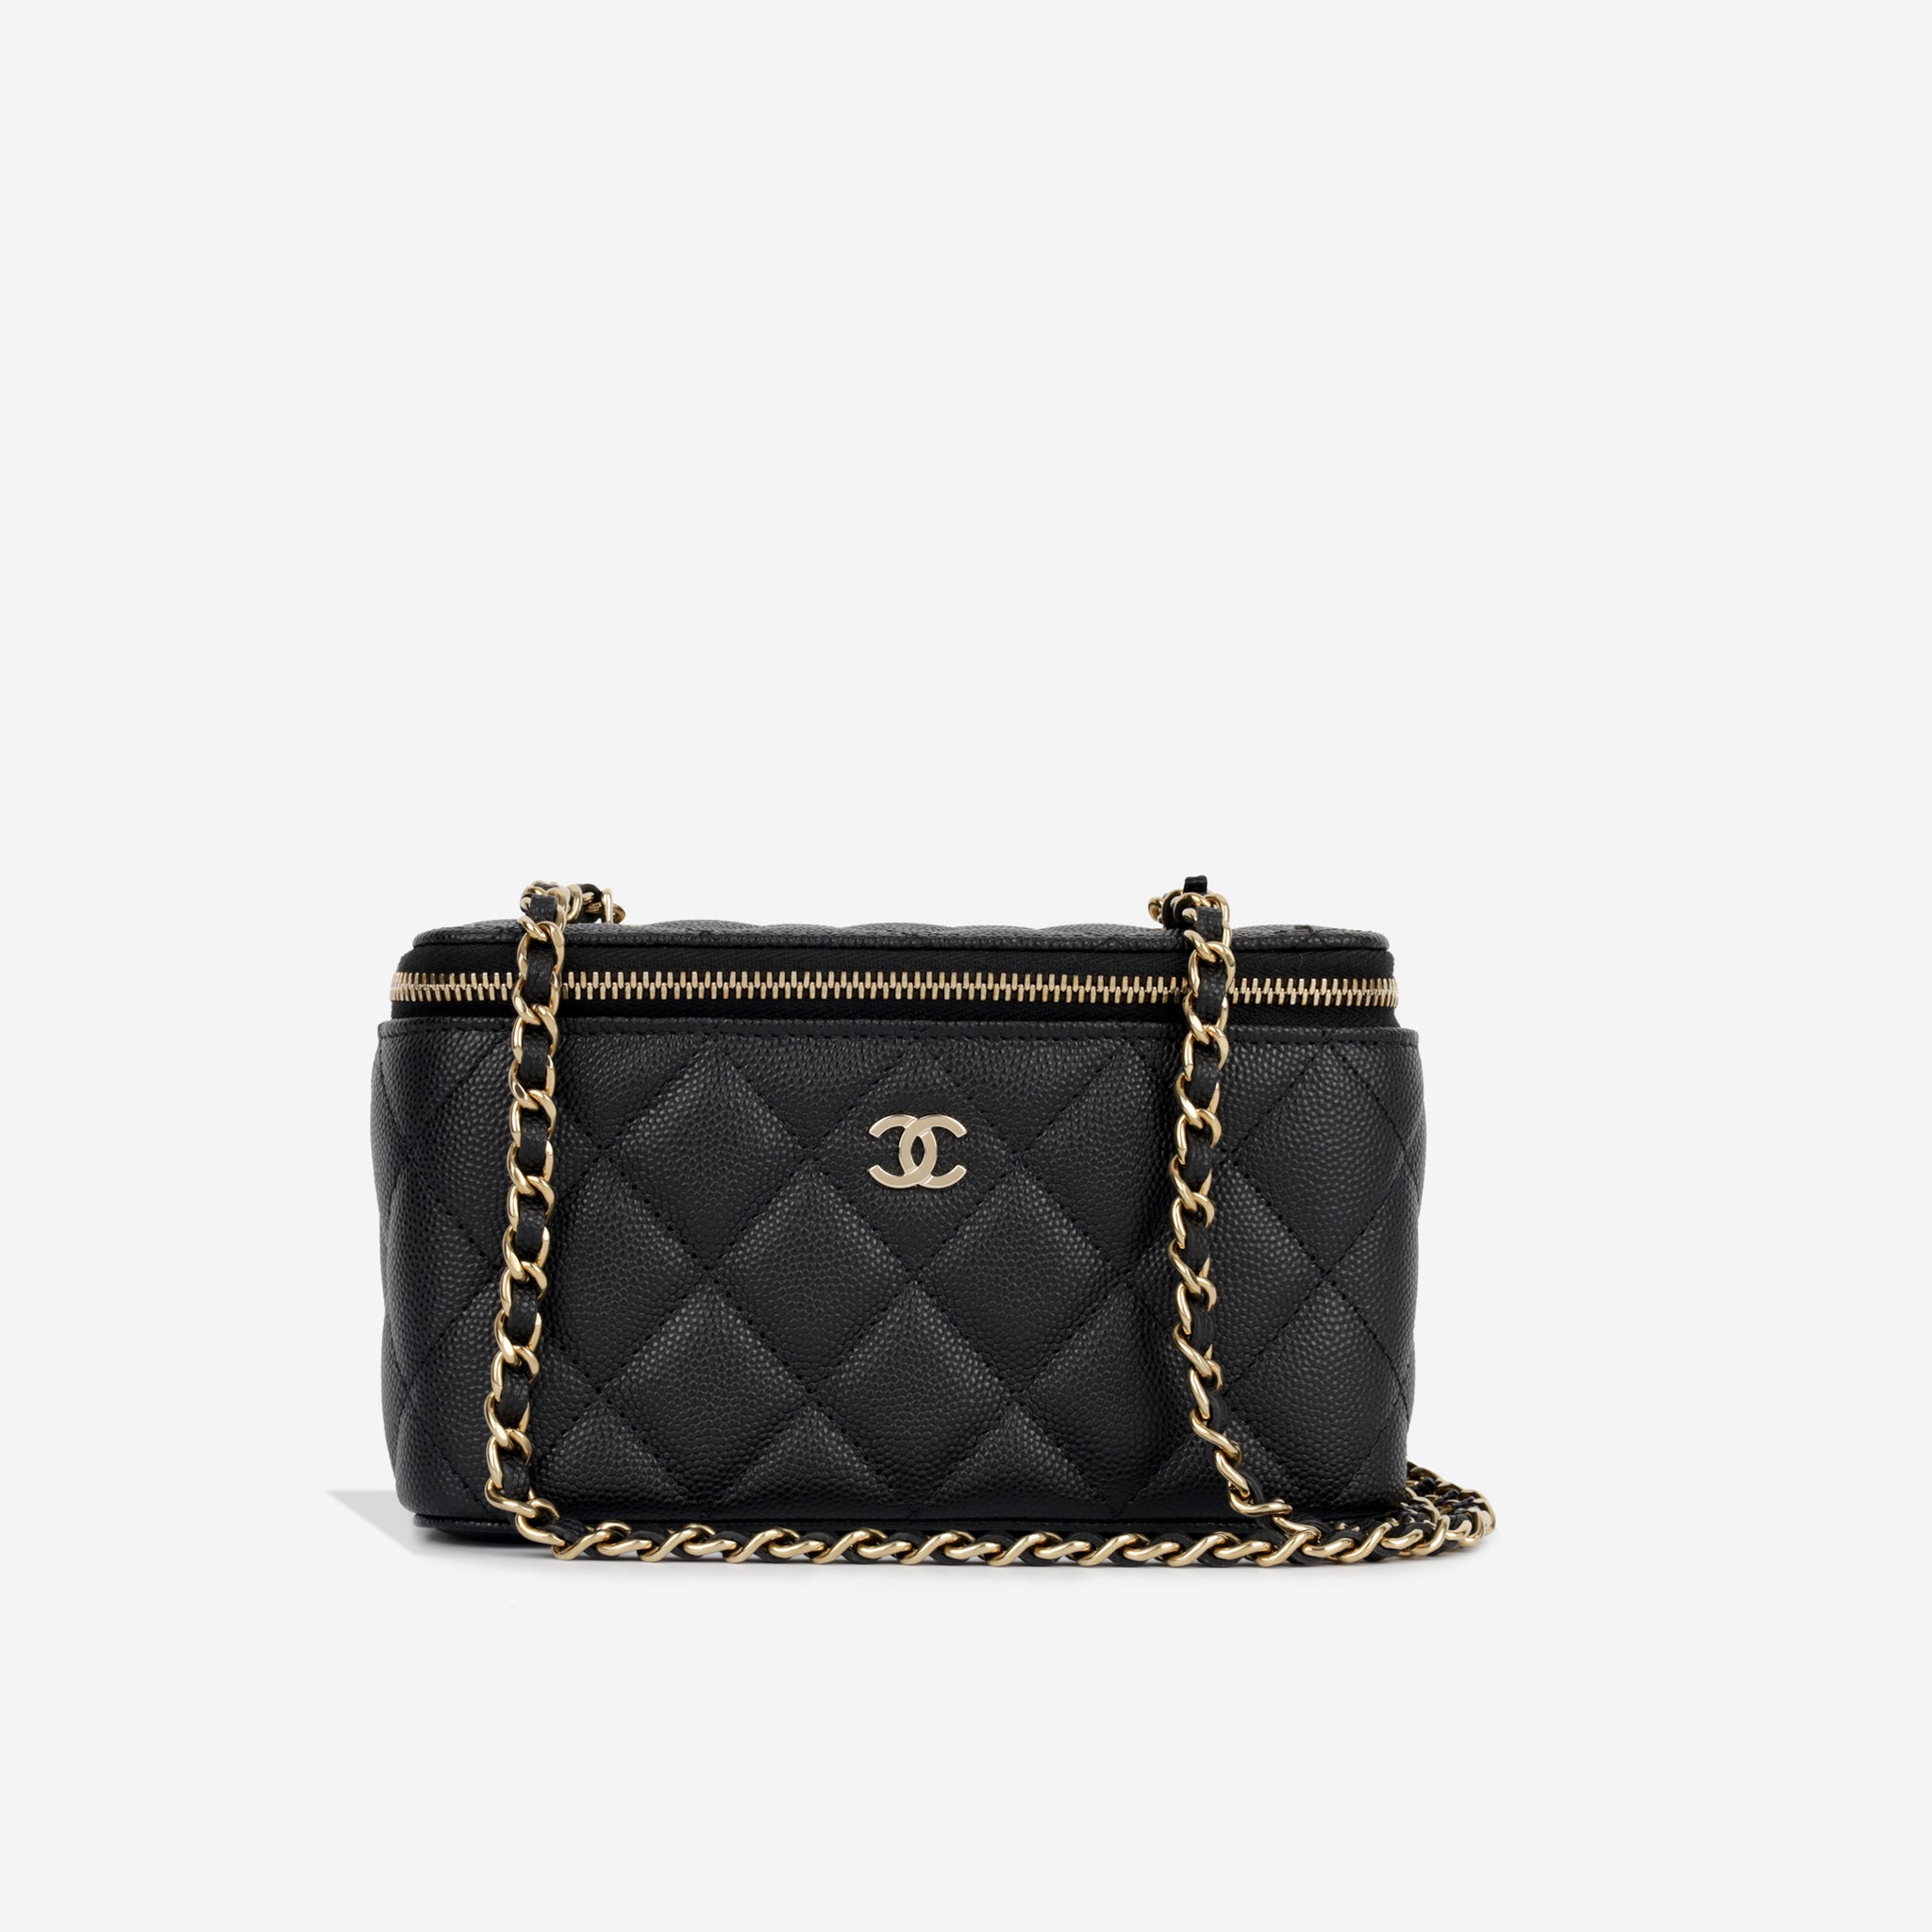 Chanel - Small Vanity on Chain - Black Caviar GHW - Immaculate